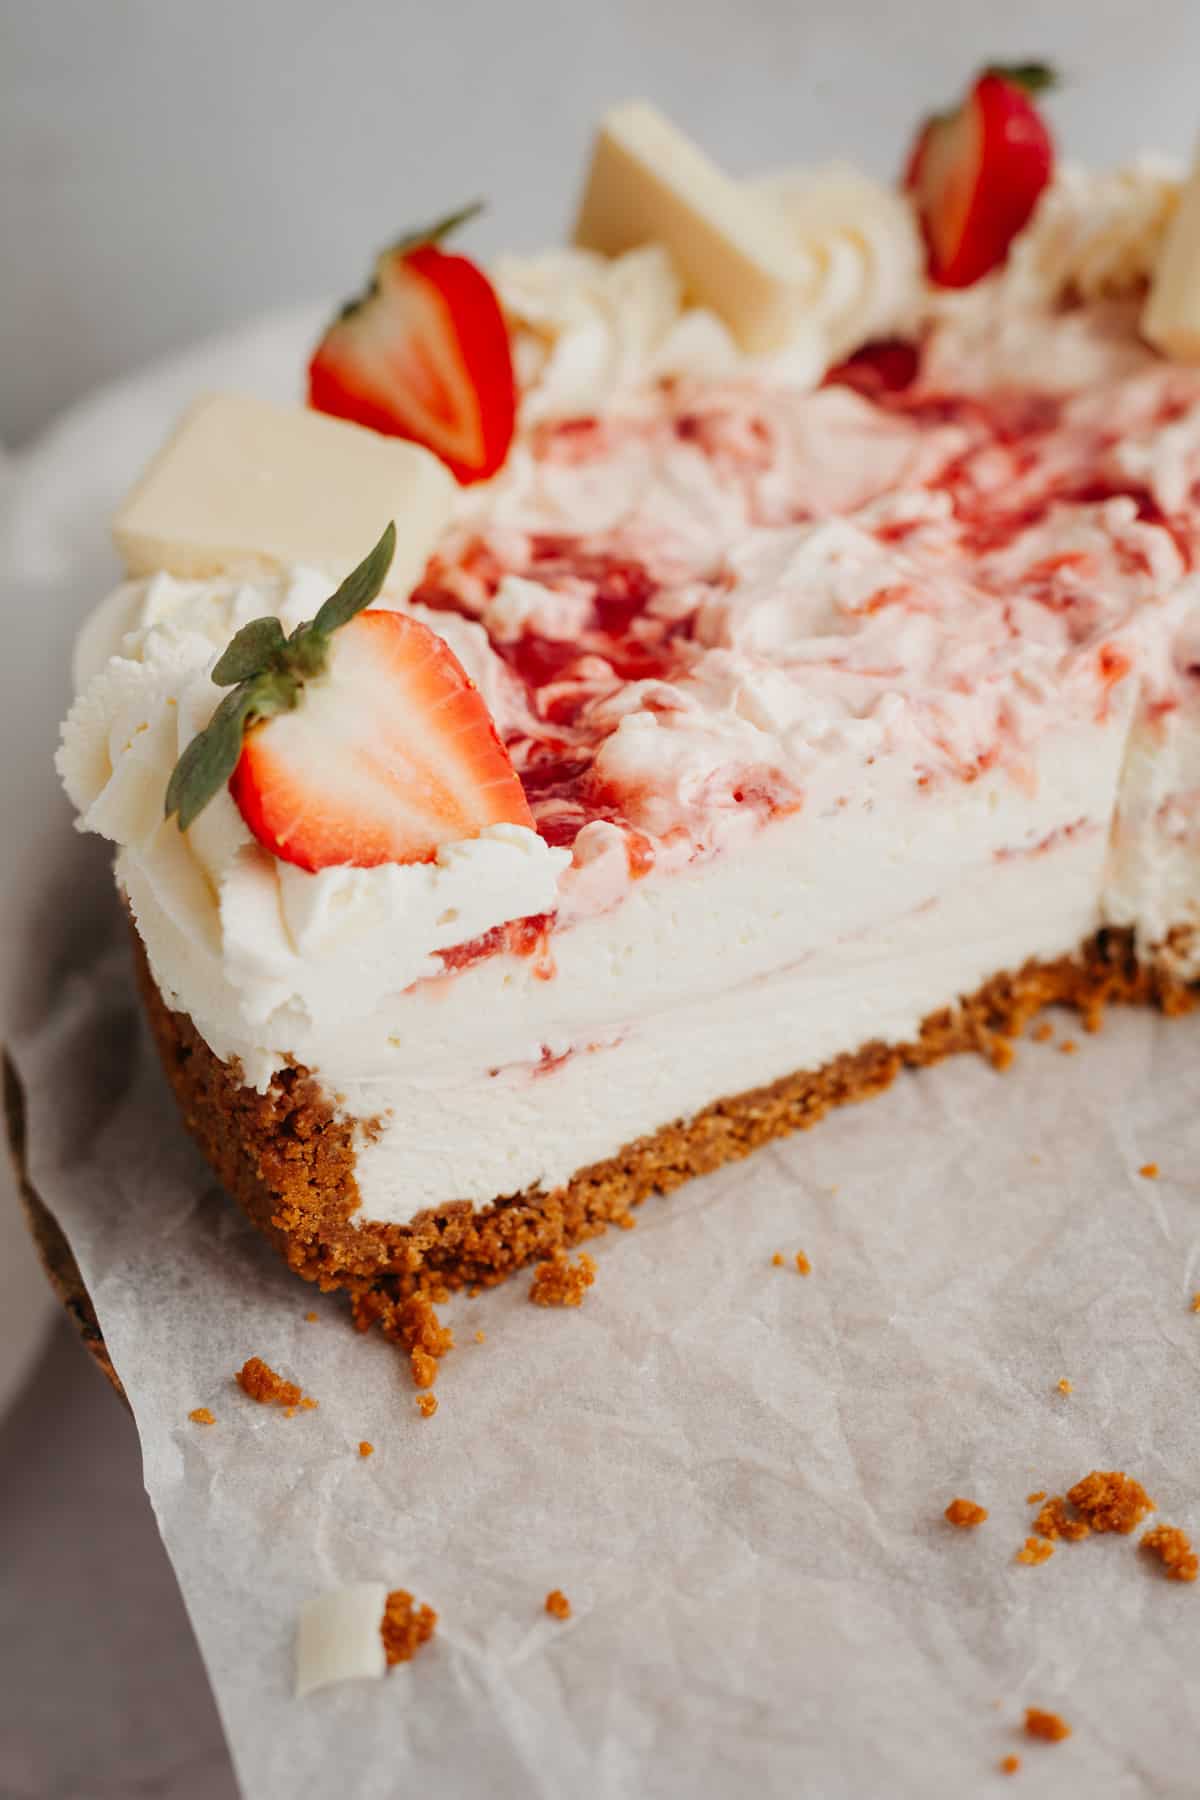 A slice of a strawberry white chocolate cheesecake on parchment paper.